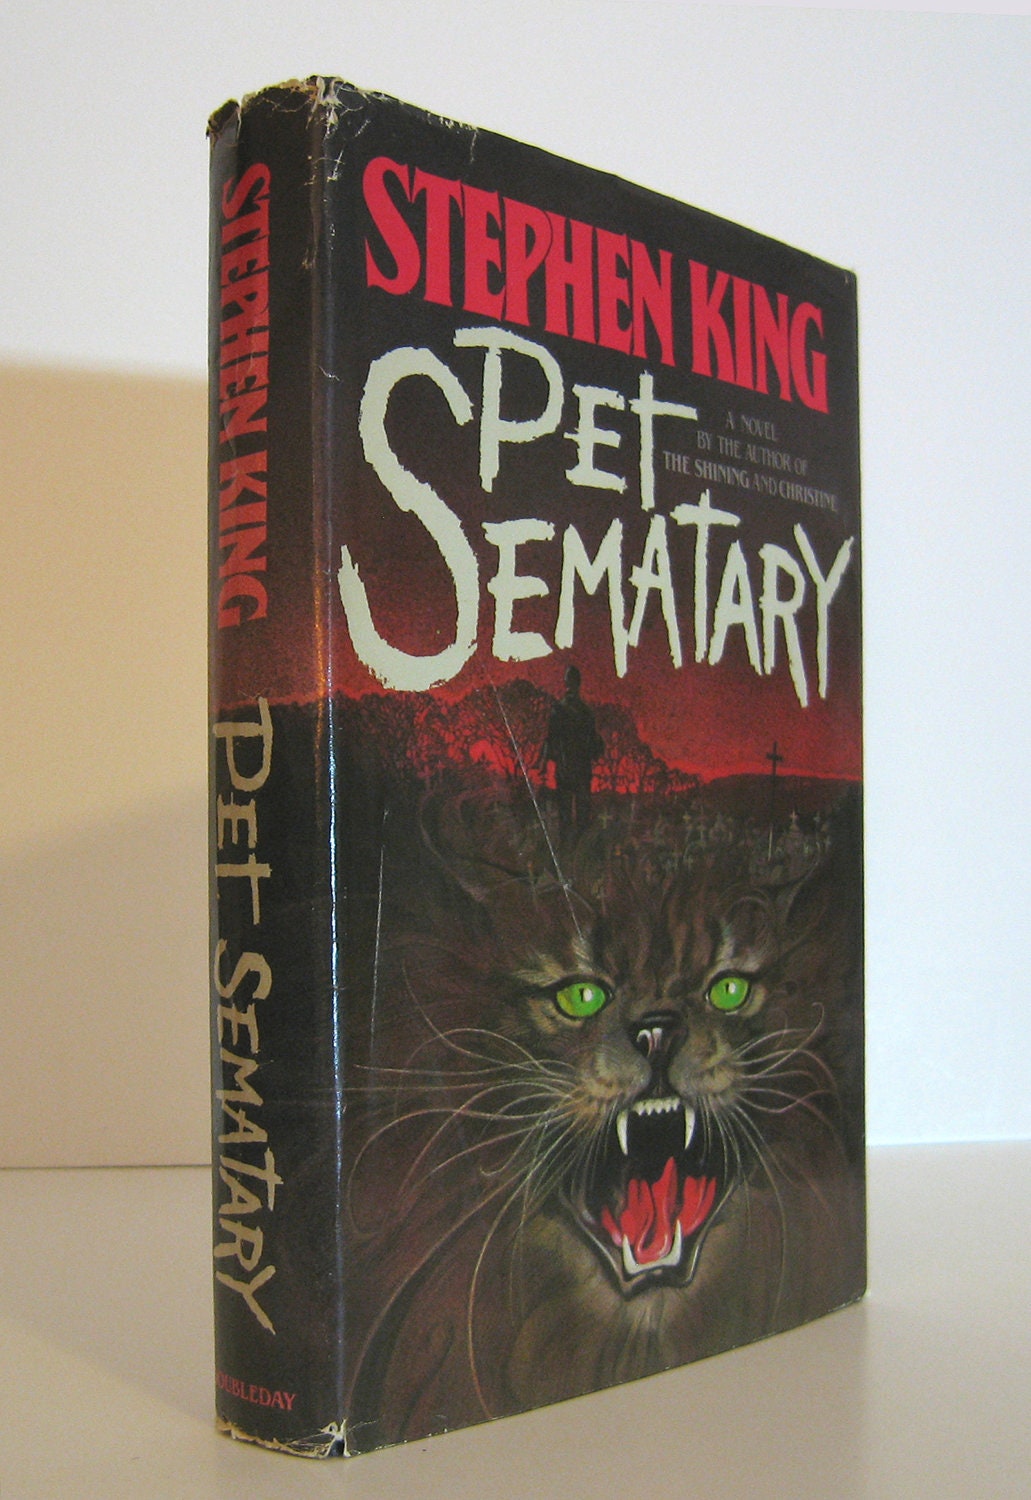 Pet Sematary First Edition Stephen King 1983 Hardcover Great